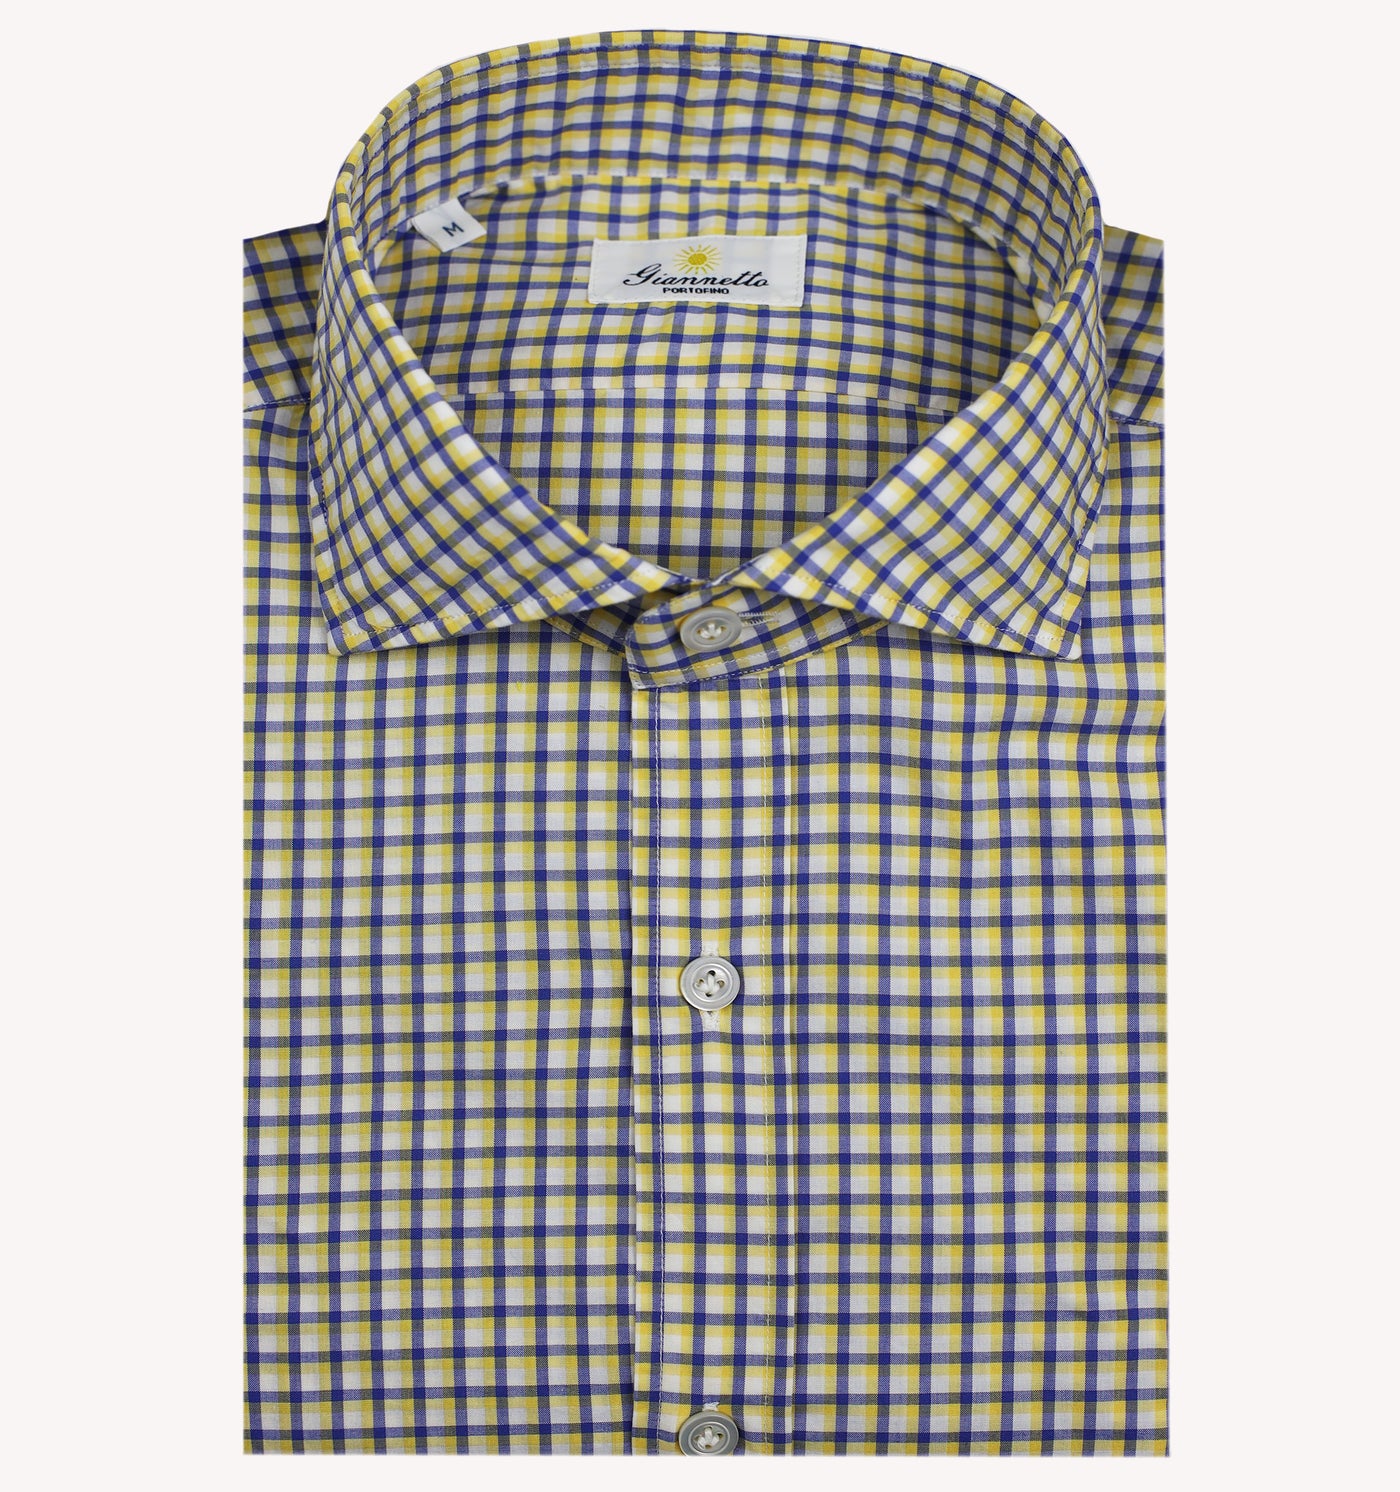 Giannetto Check Sport Shirt in Blue Yellow